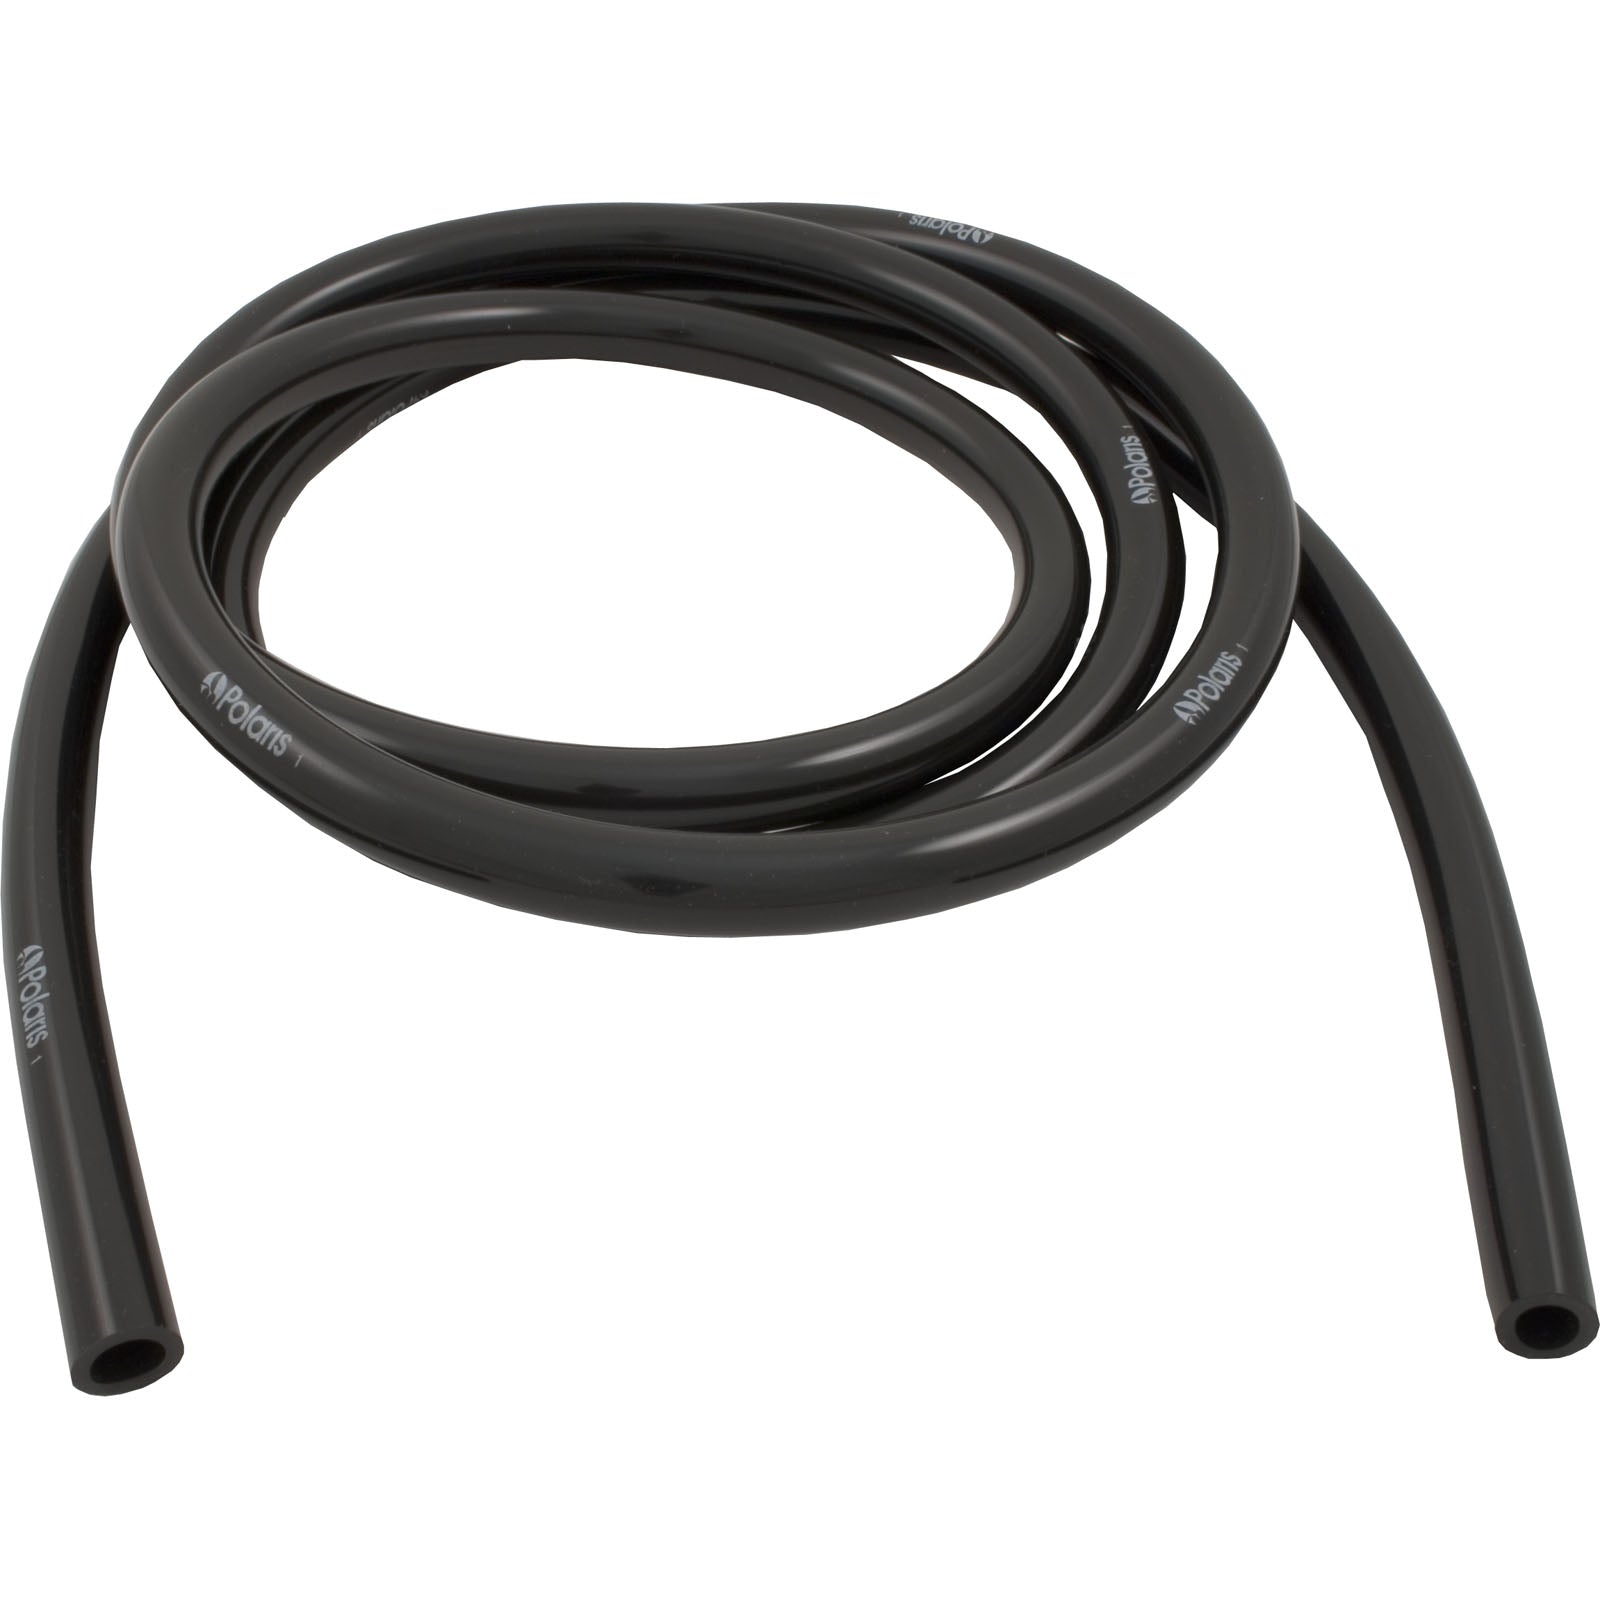 Zodiac /Polaris D47 10' Black Feed Hose for Polaris 280/380 and 480 PRO Pool Cleaners